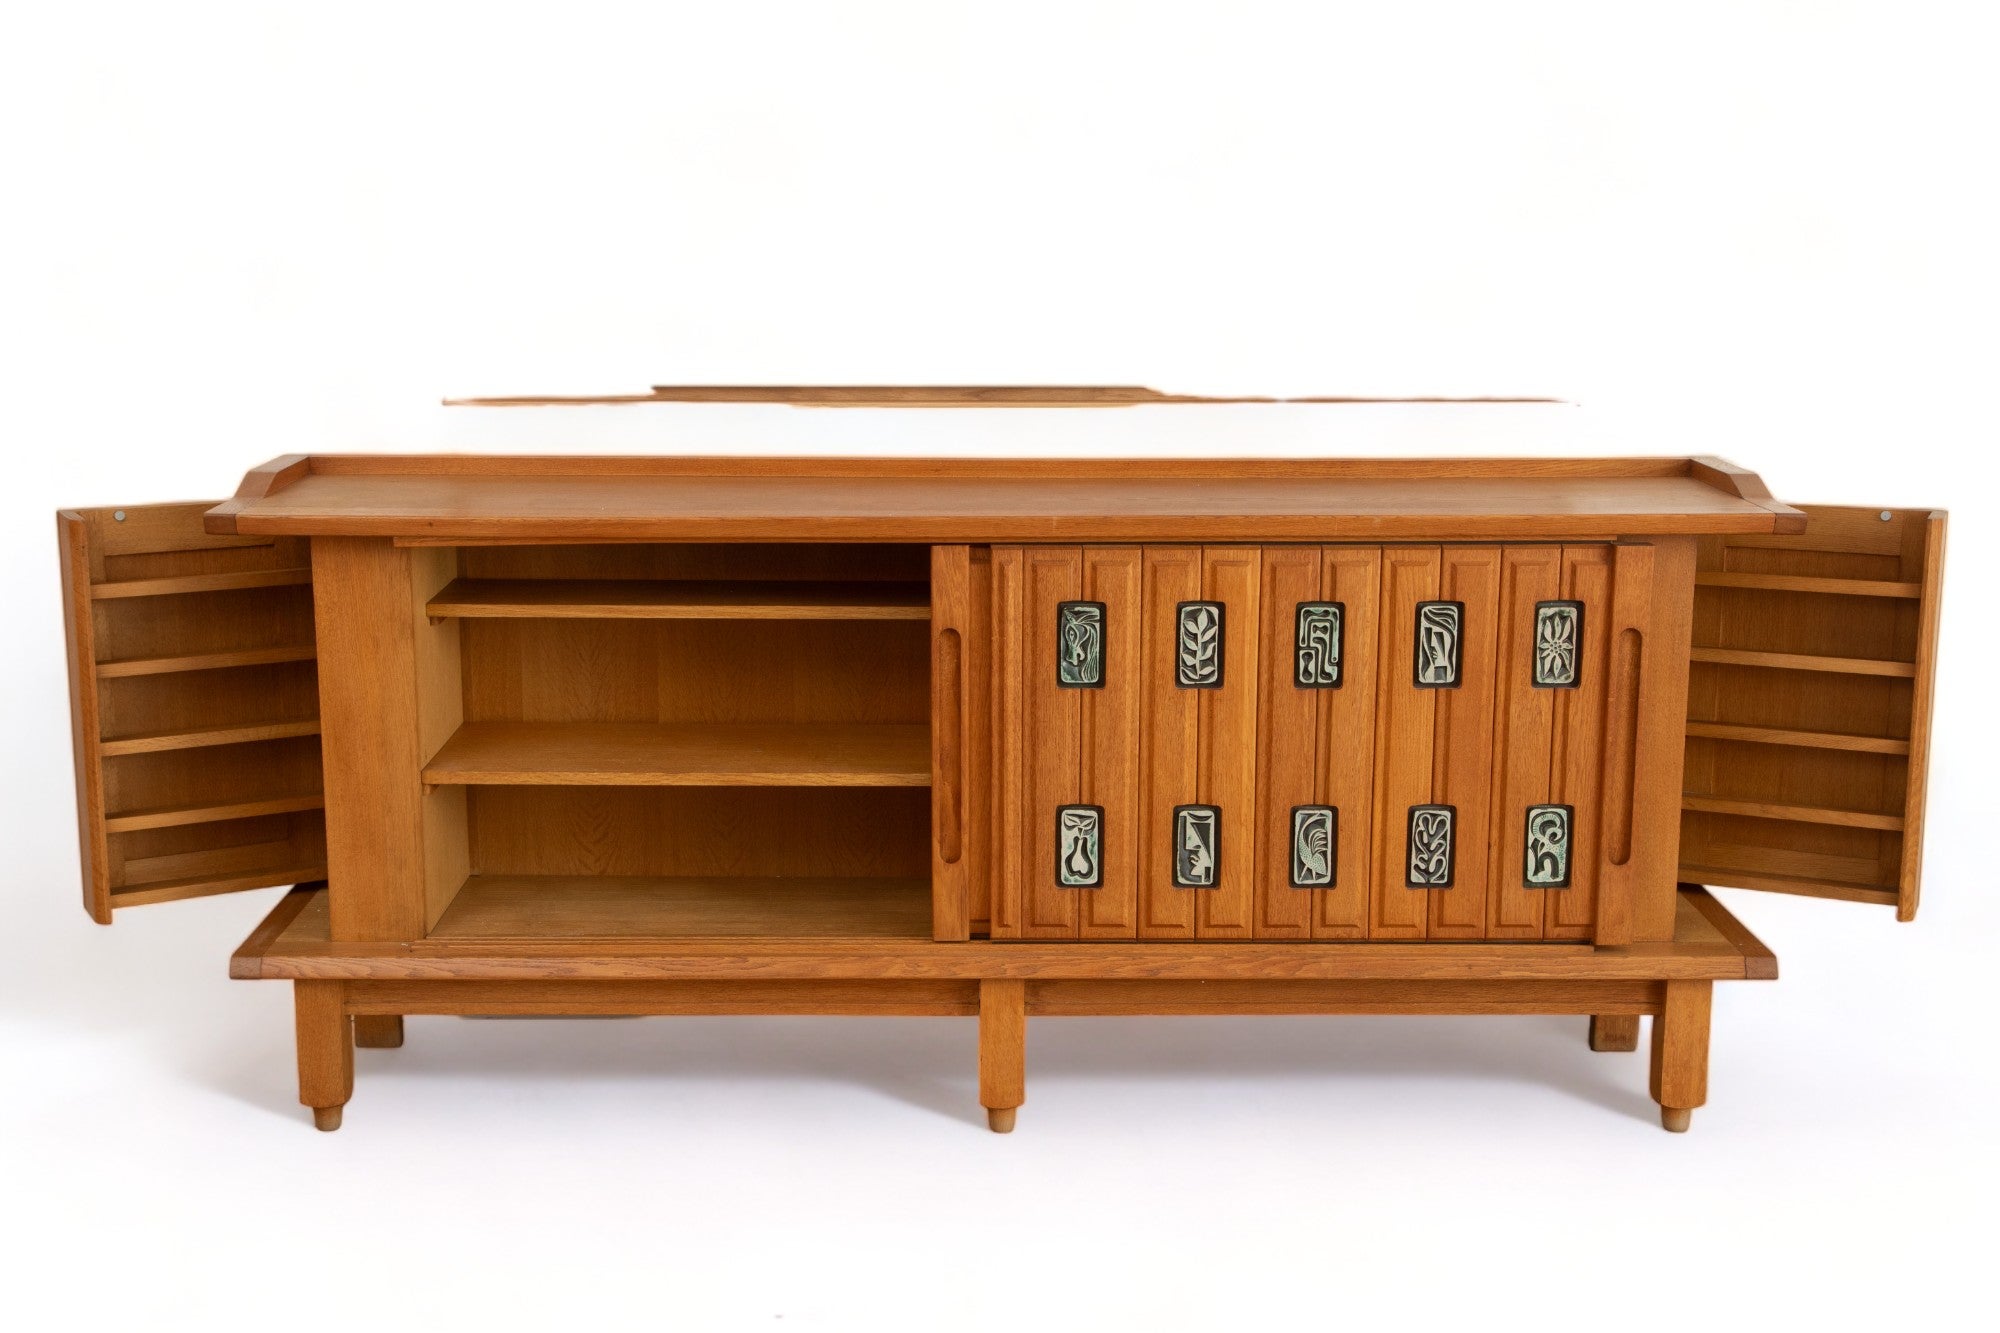 Large Oak Sideboard by Guillerme and Chambron 
Edition Votre Maison, France circa 1950-1960
 Opens with two sliding doors decorated by 20 glazed celadon and black ceramics by artist Boleslaw Danikowski
Concealing spacious storage with 2 shelves on